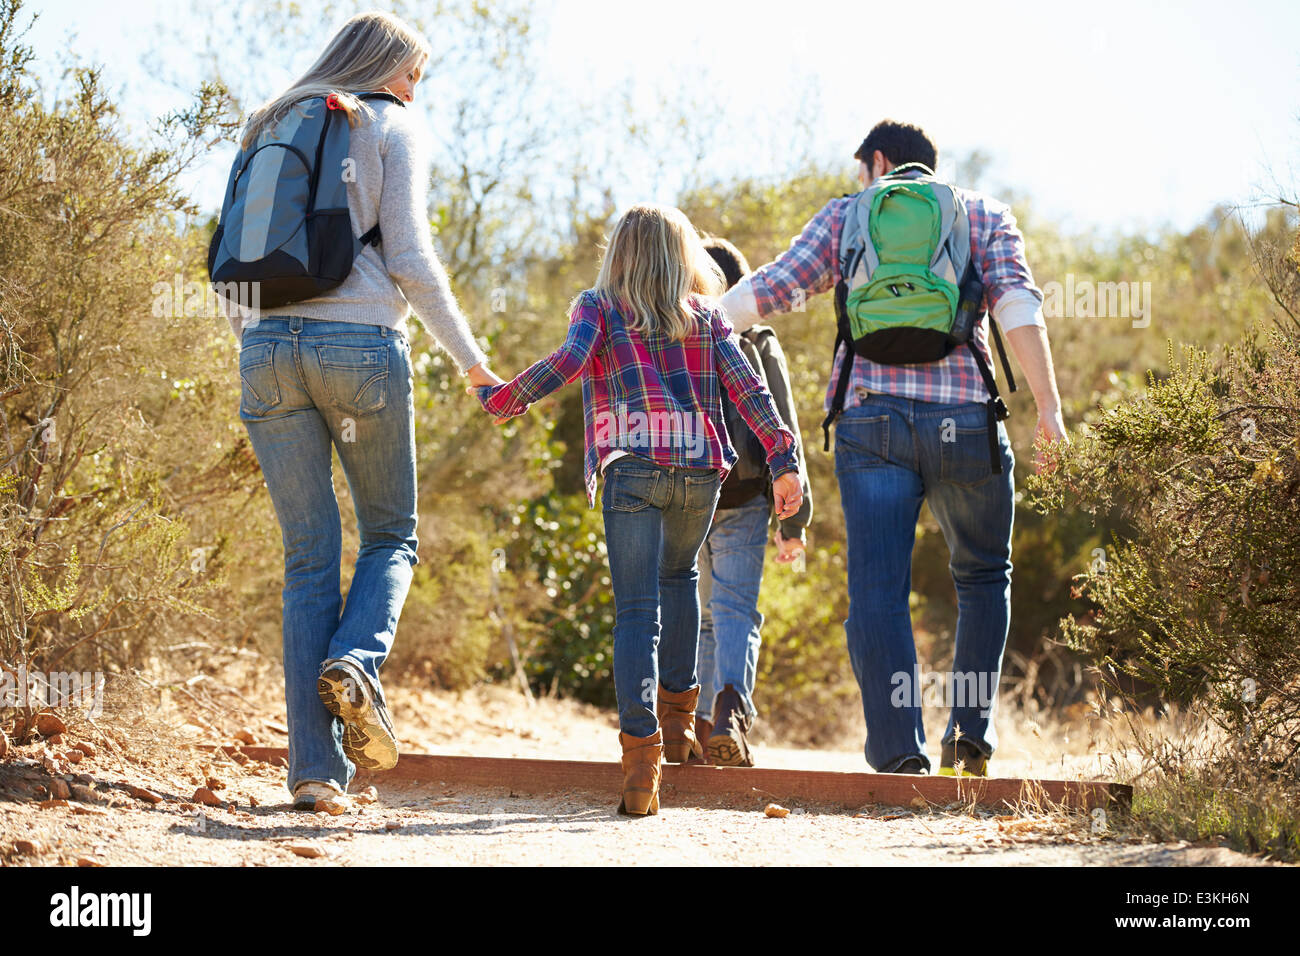 Rear View Of Family Hiking In Countryside Wearing Backpacks Stock Photo